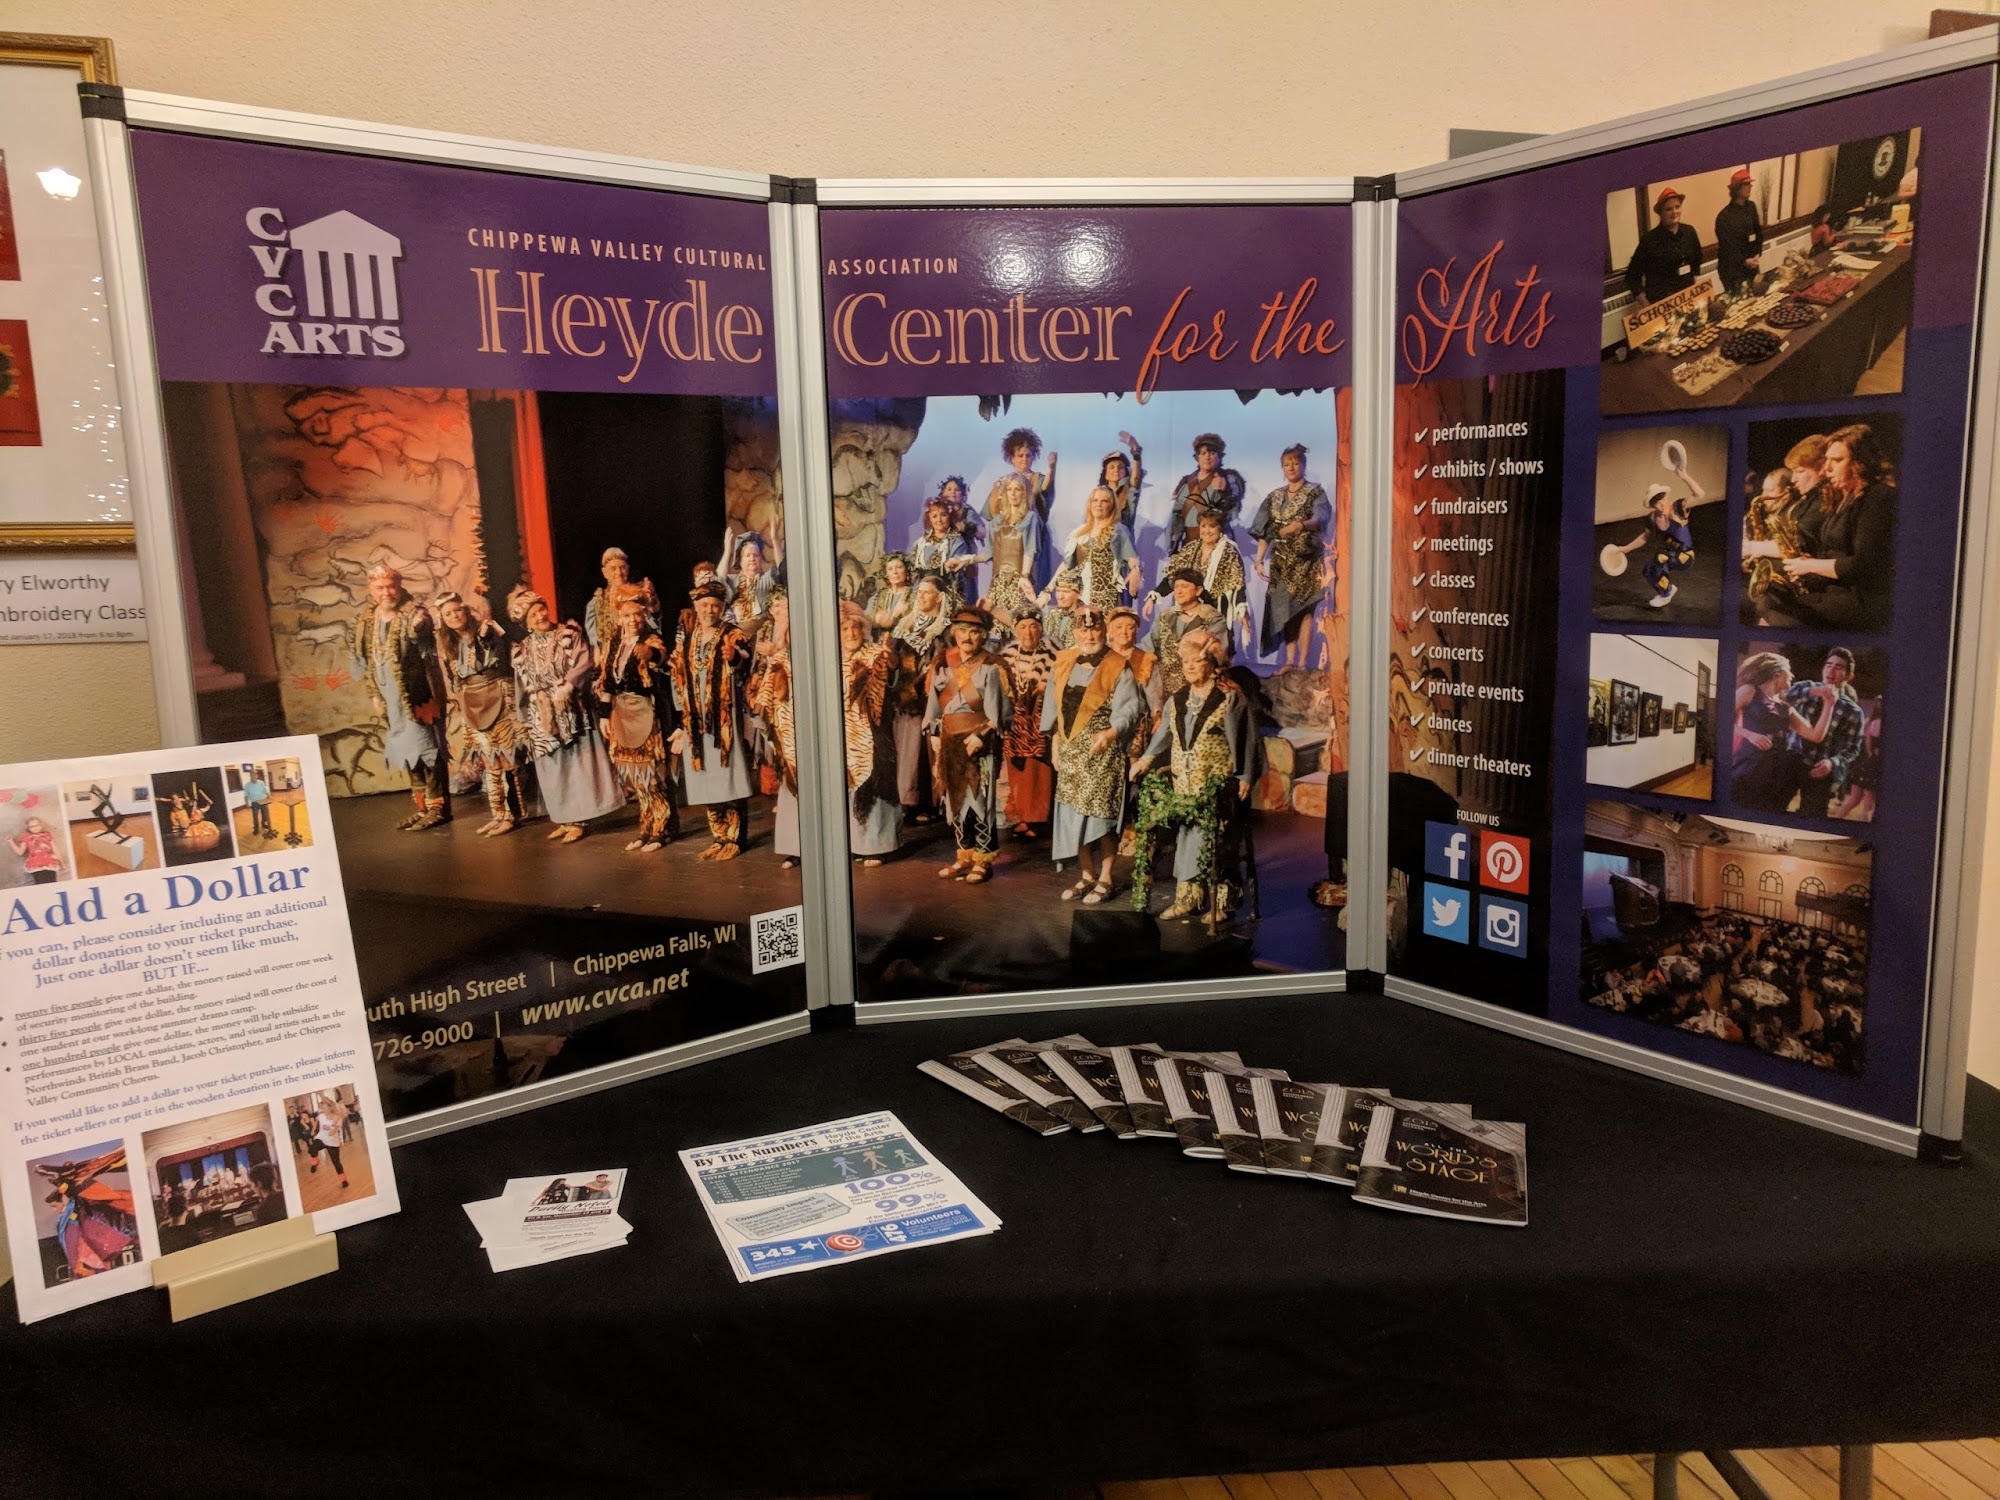 Heyde Center For the Arts